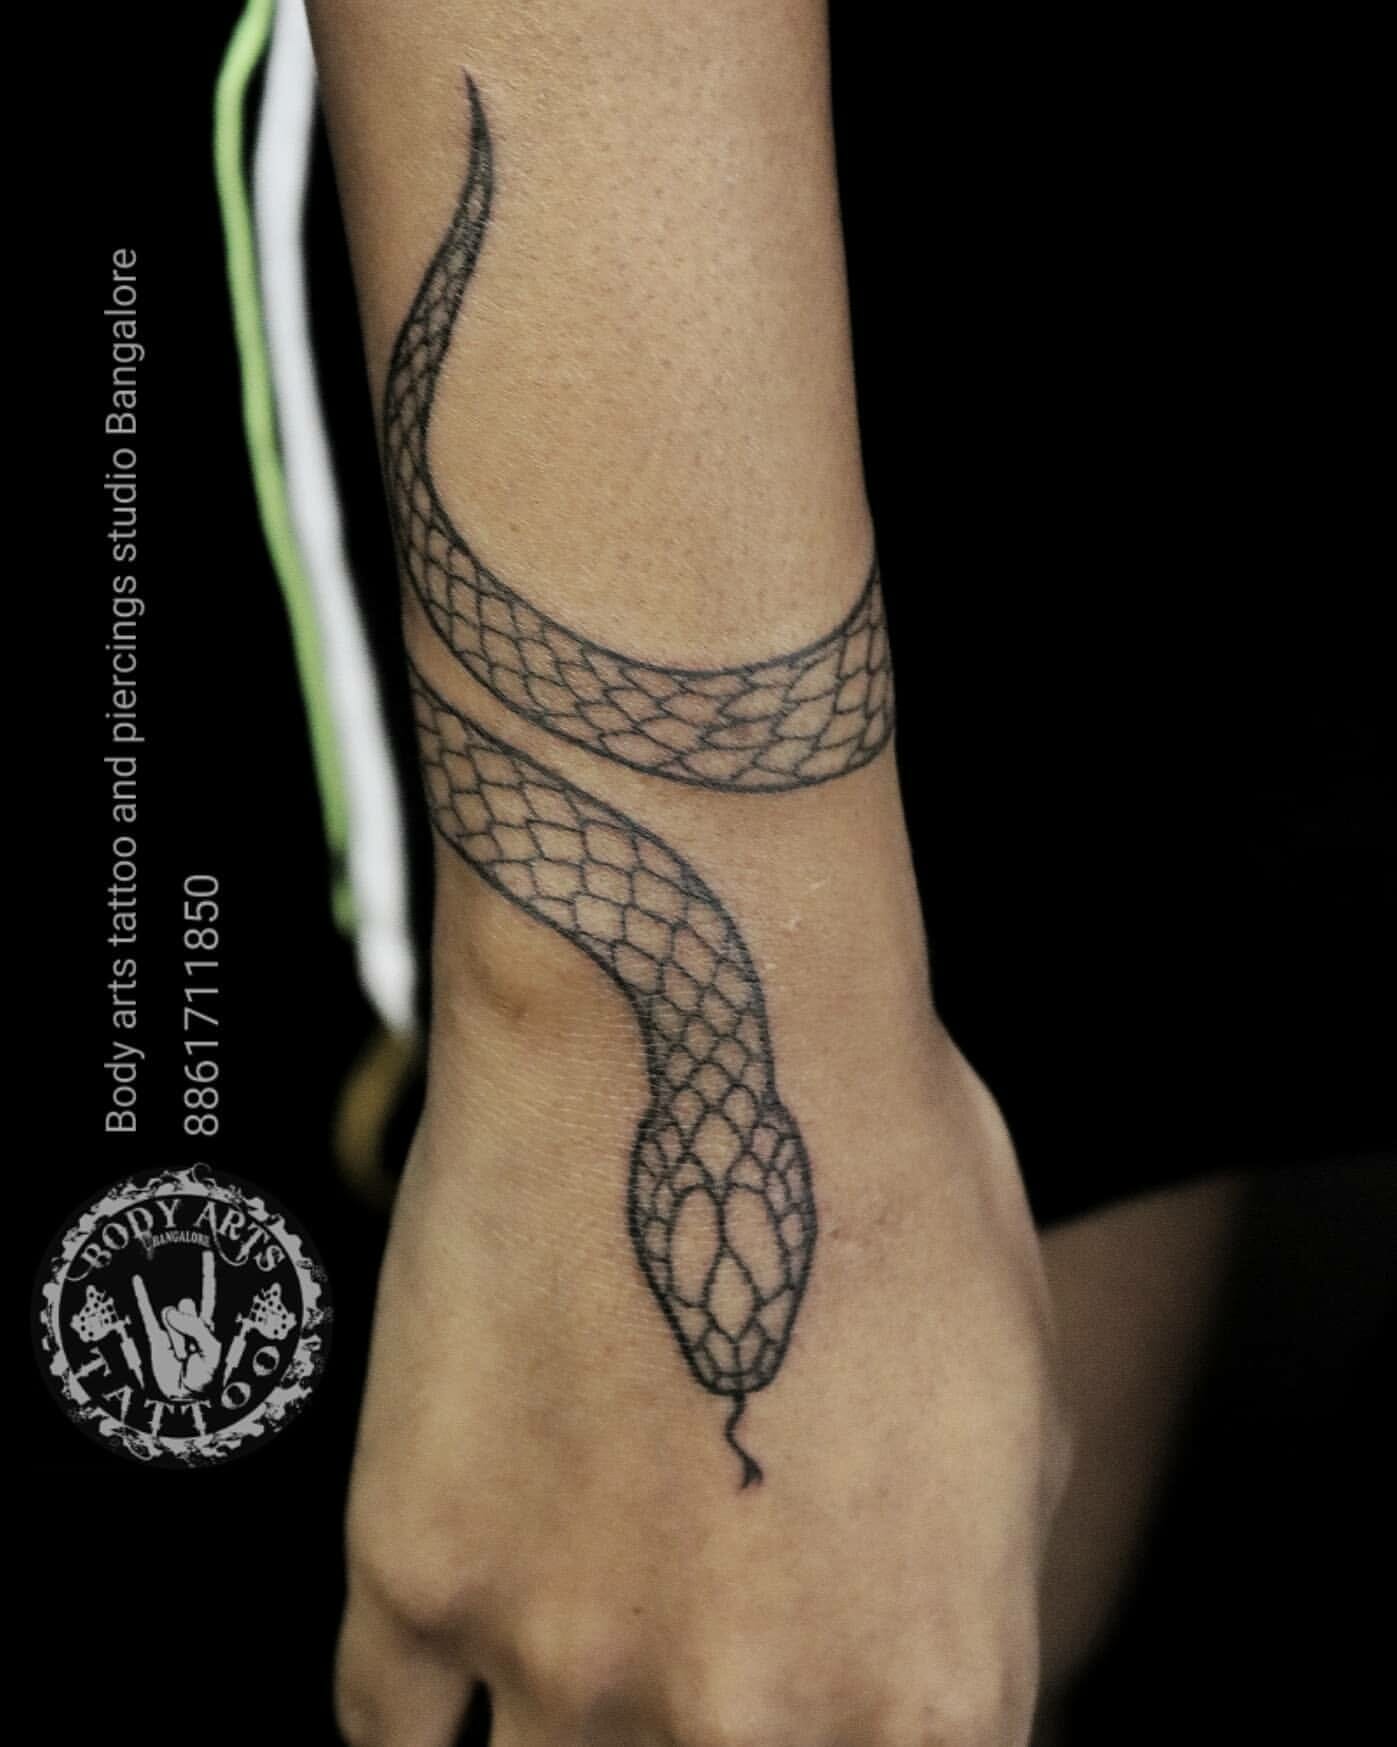 101 Best Small Snake Tattoo Ideas You Have To See To Believe! - Outsons